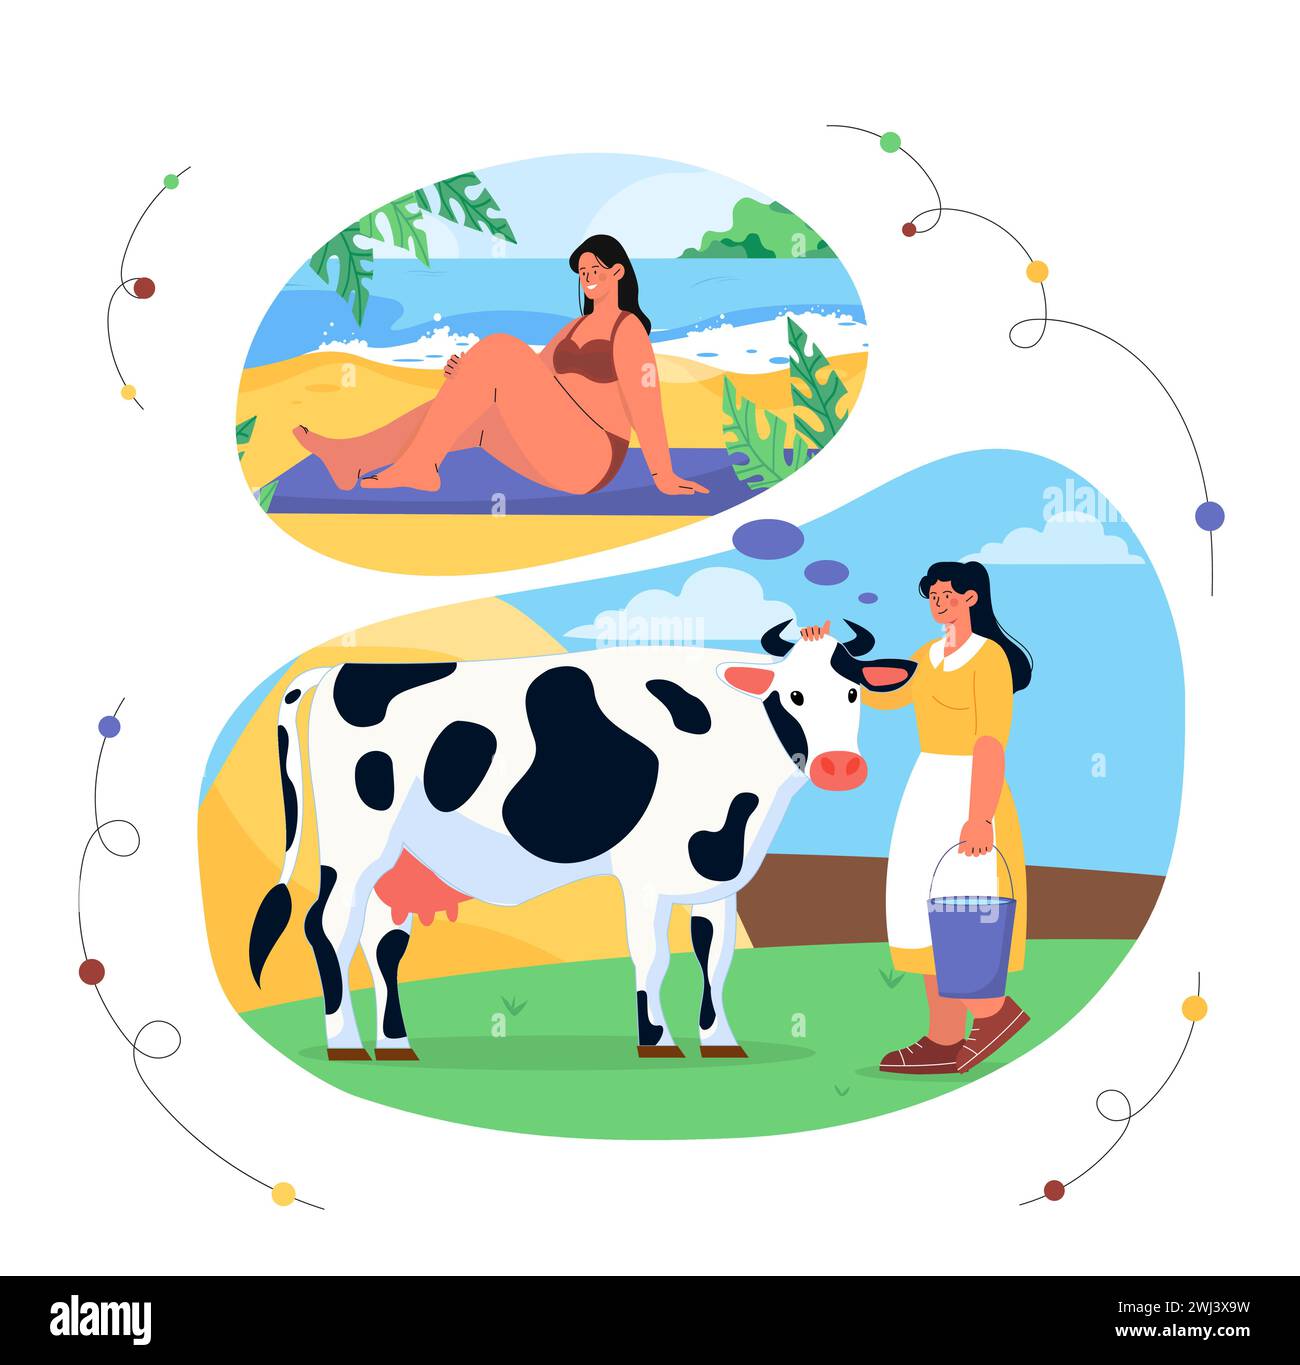 Milkmaid dream about sea vector Stock Vector